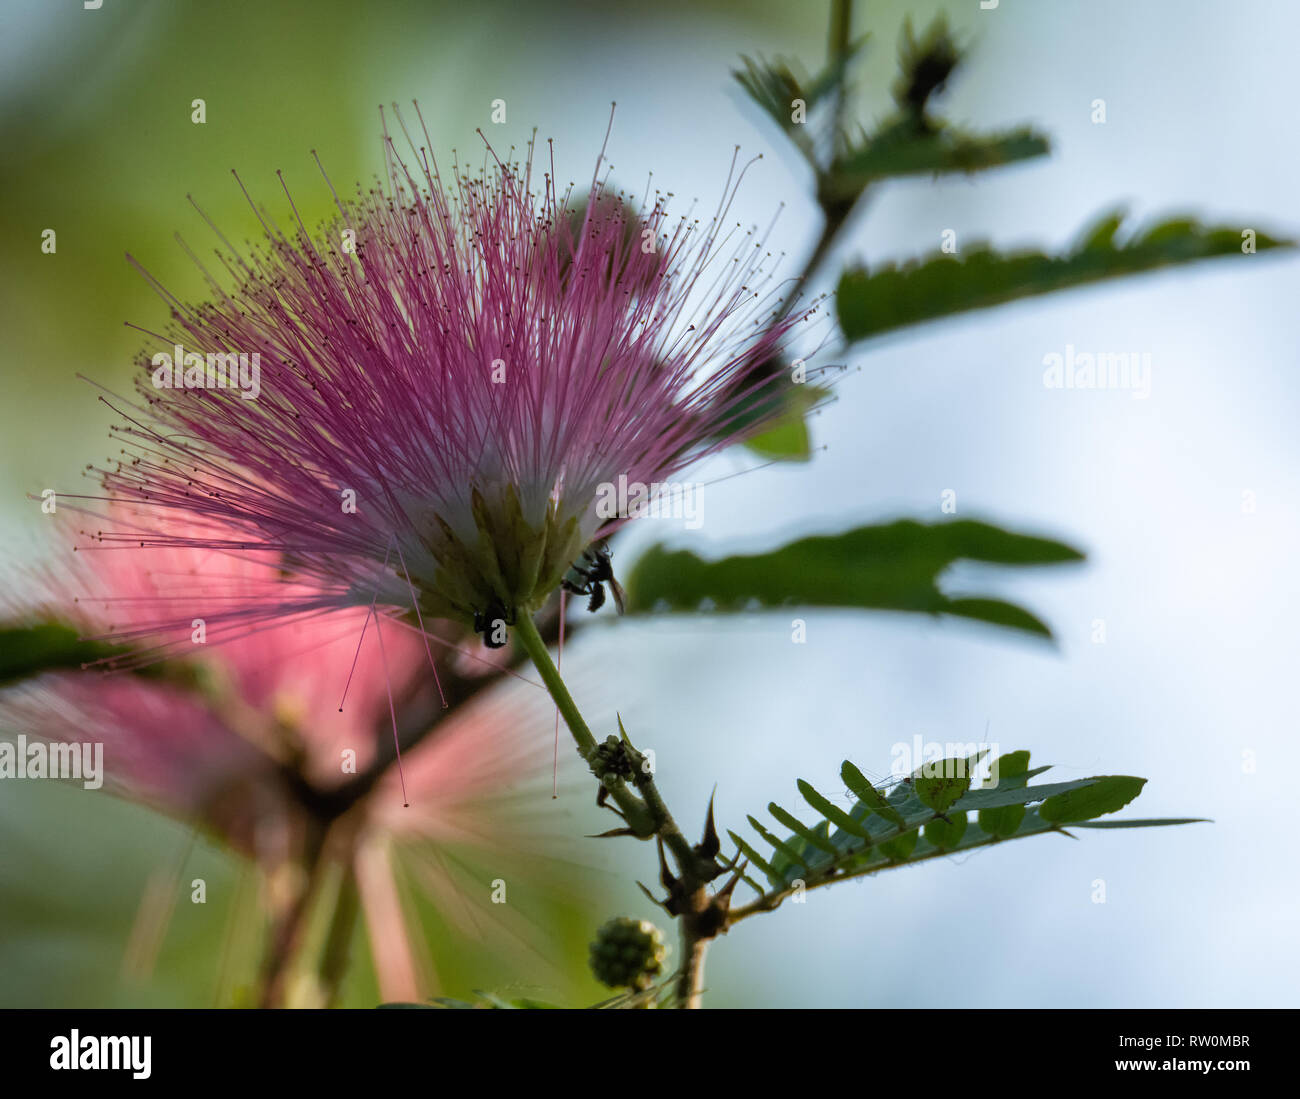 A Persian Silk tree sends up dozens of pink filaments to form its bloom. Stock Photo